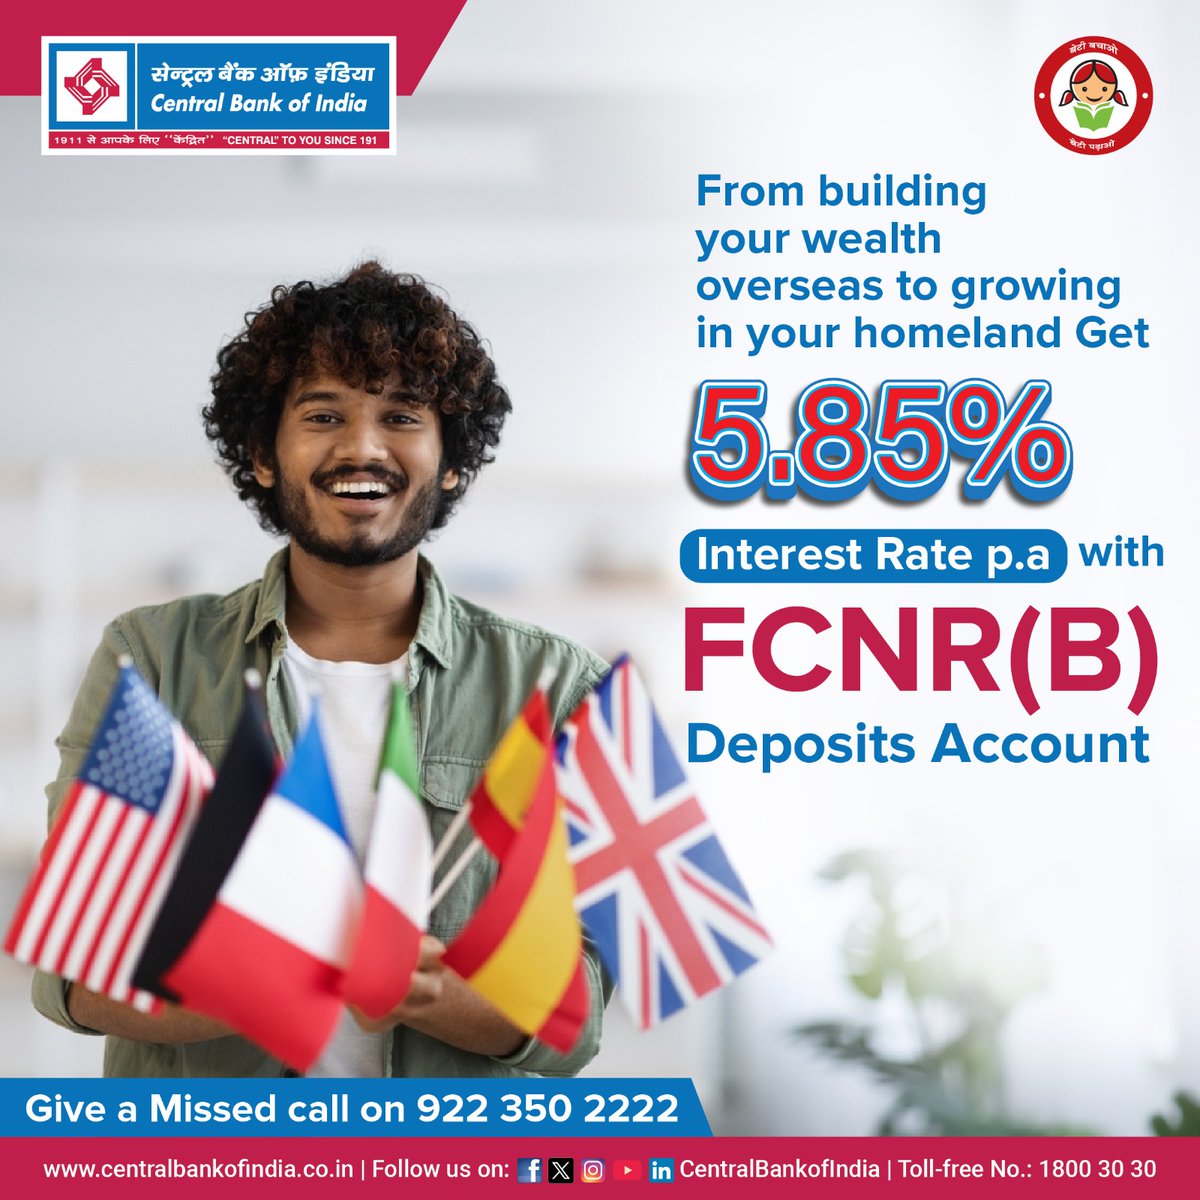 Empower your financial future and discover the strength of FCNR-B. Begin your journey to financial stability now! 

#FCNR #CentralBankOfIndia #CentralToYouSince1911